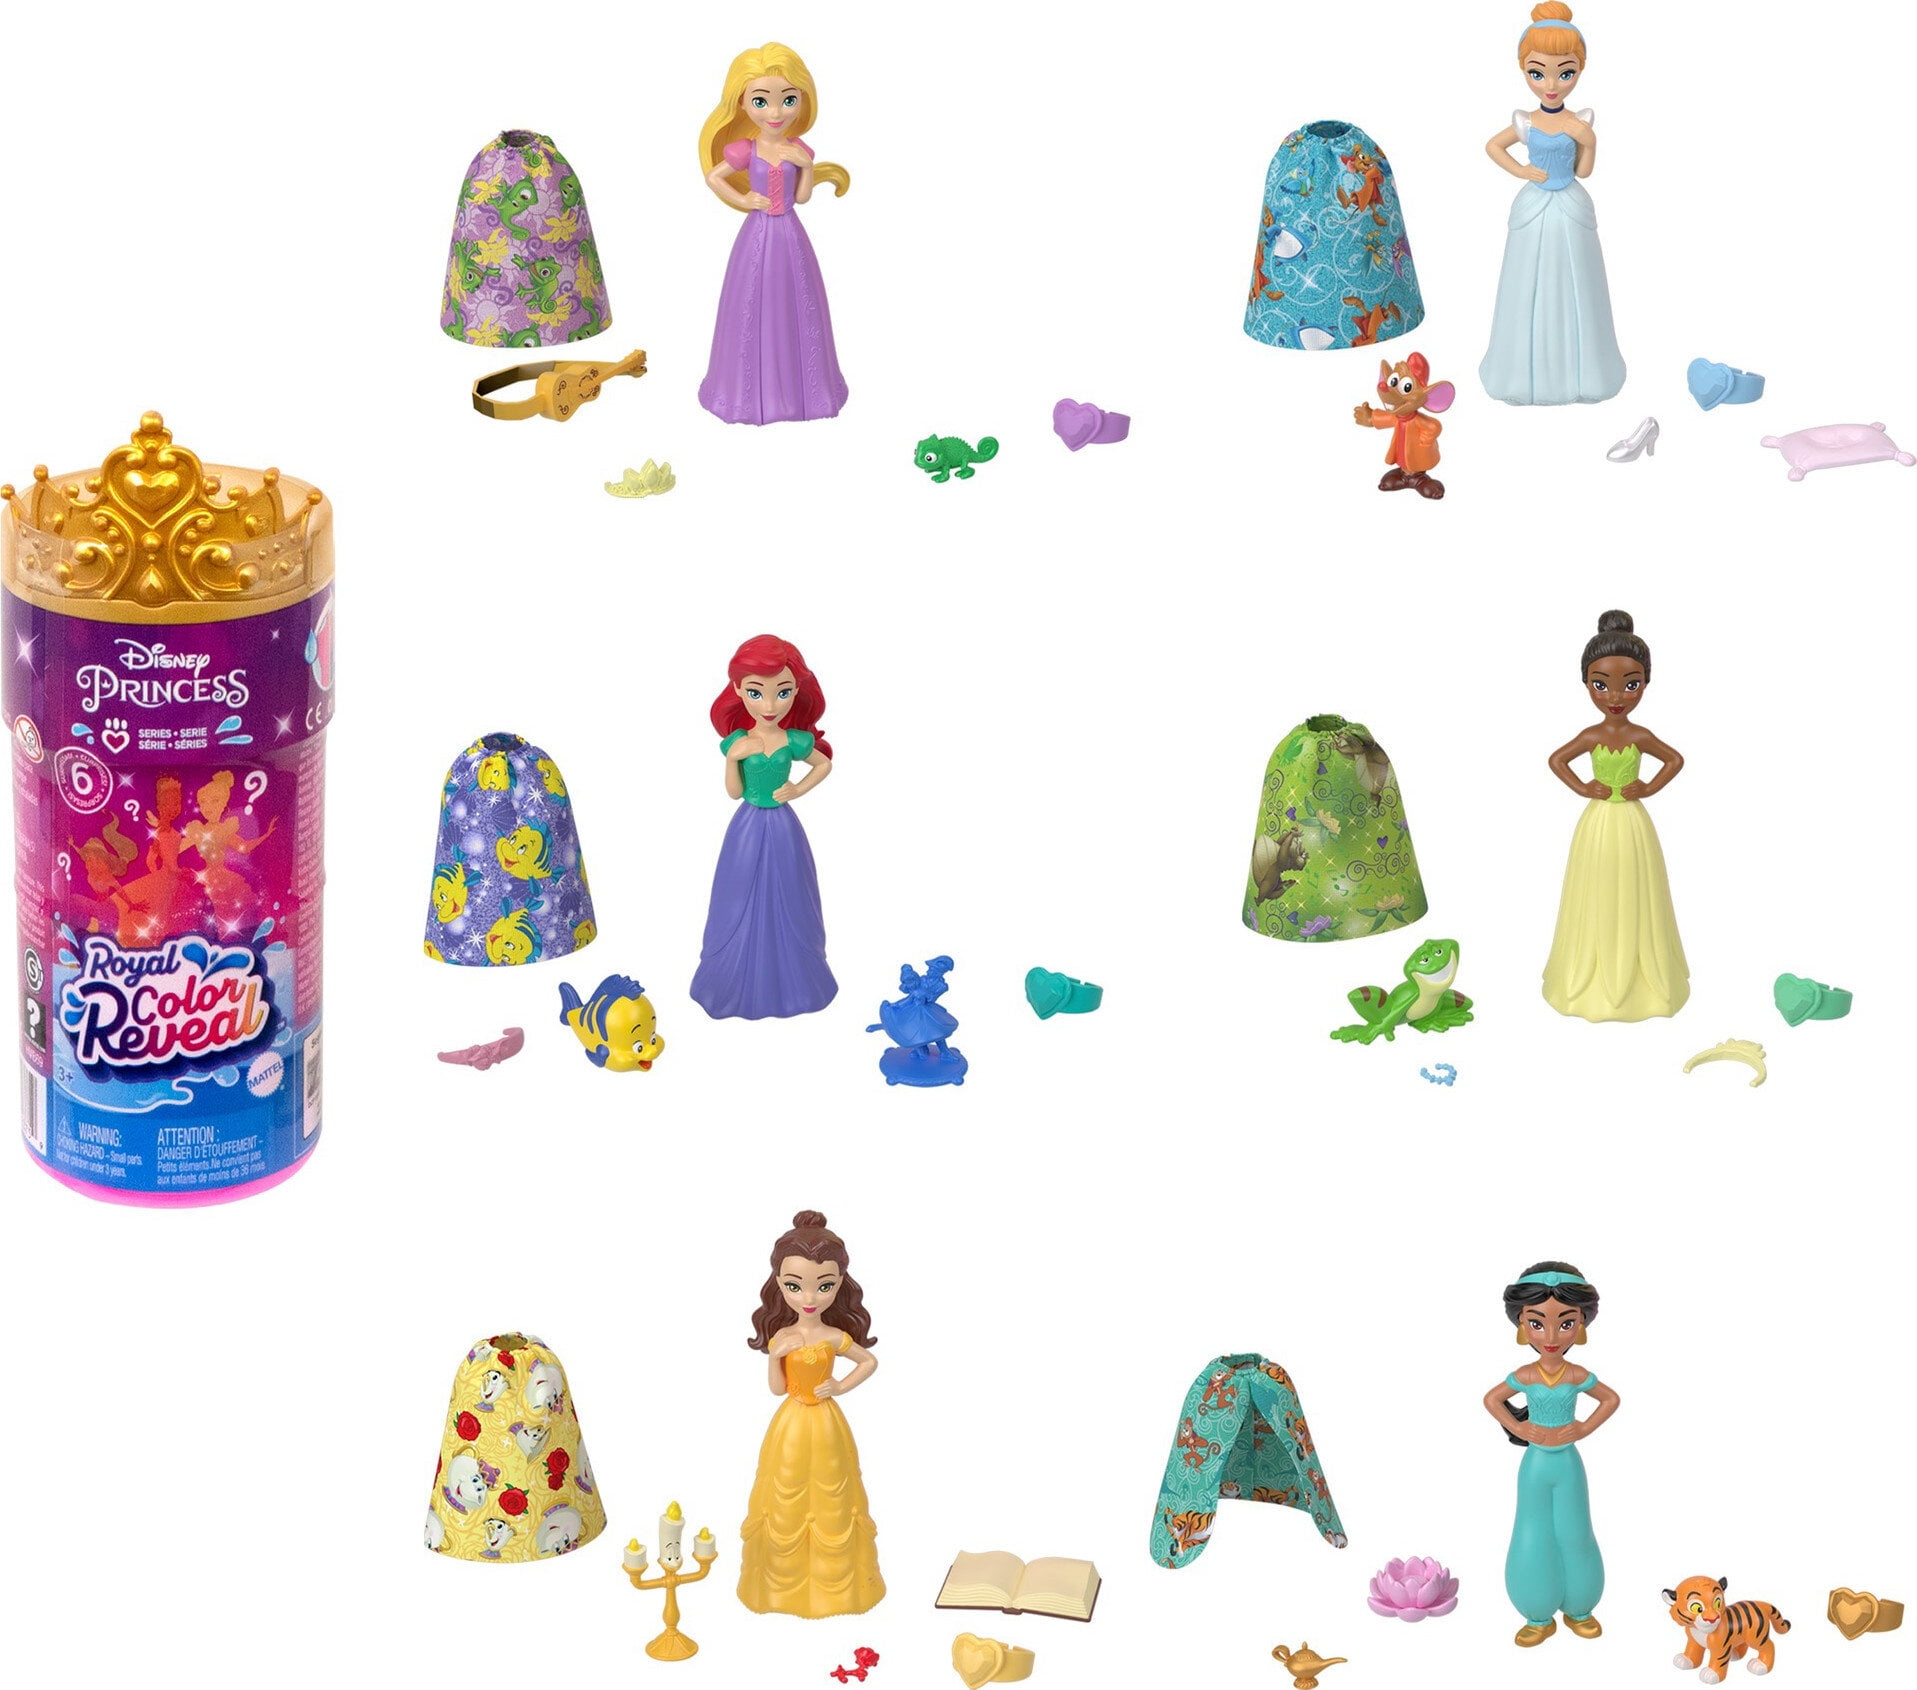 Disney Princess Royal Color Reveal Surprise Small Doll with Character Figure and Accessories (Dolls May Vary)